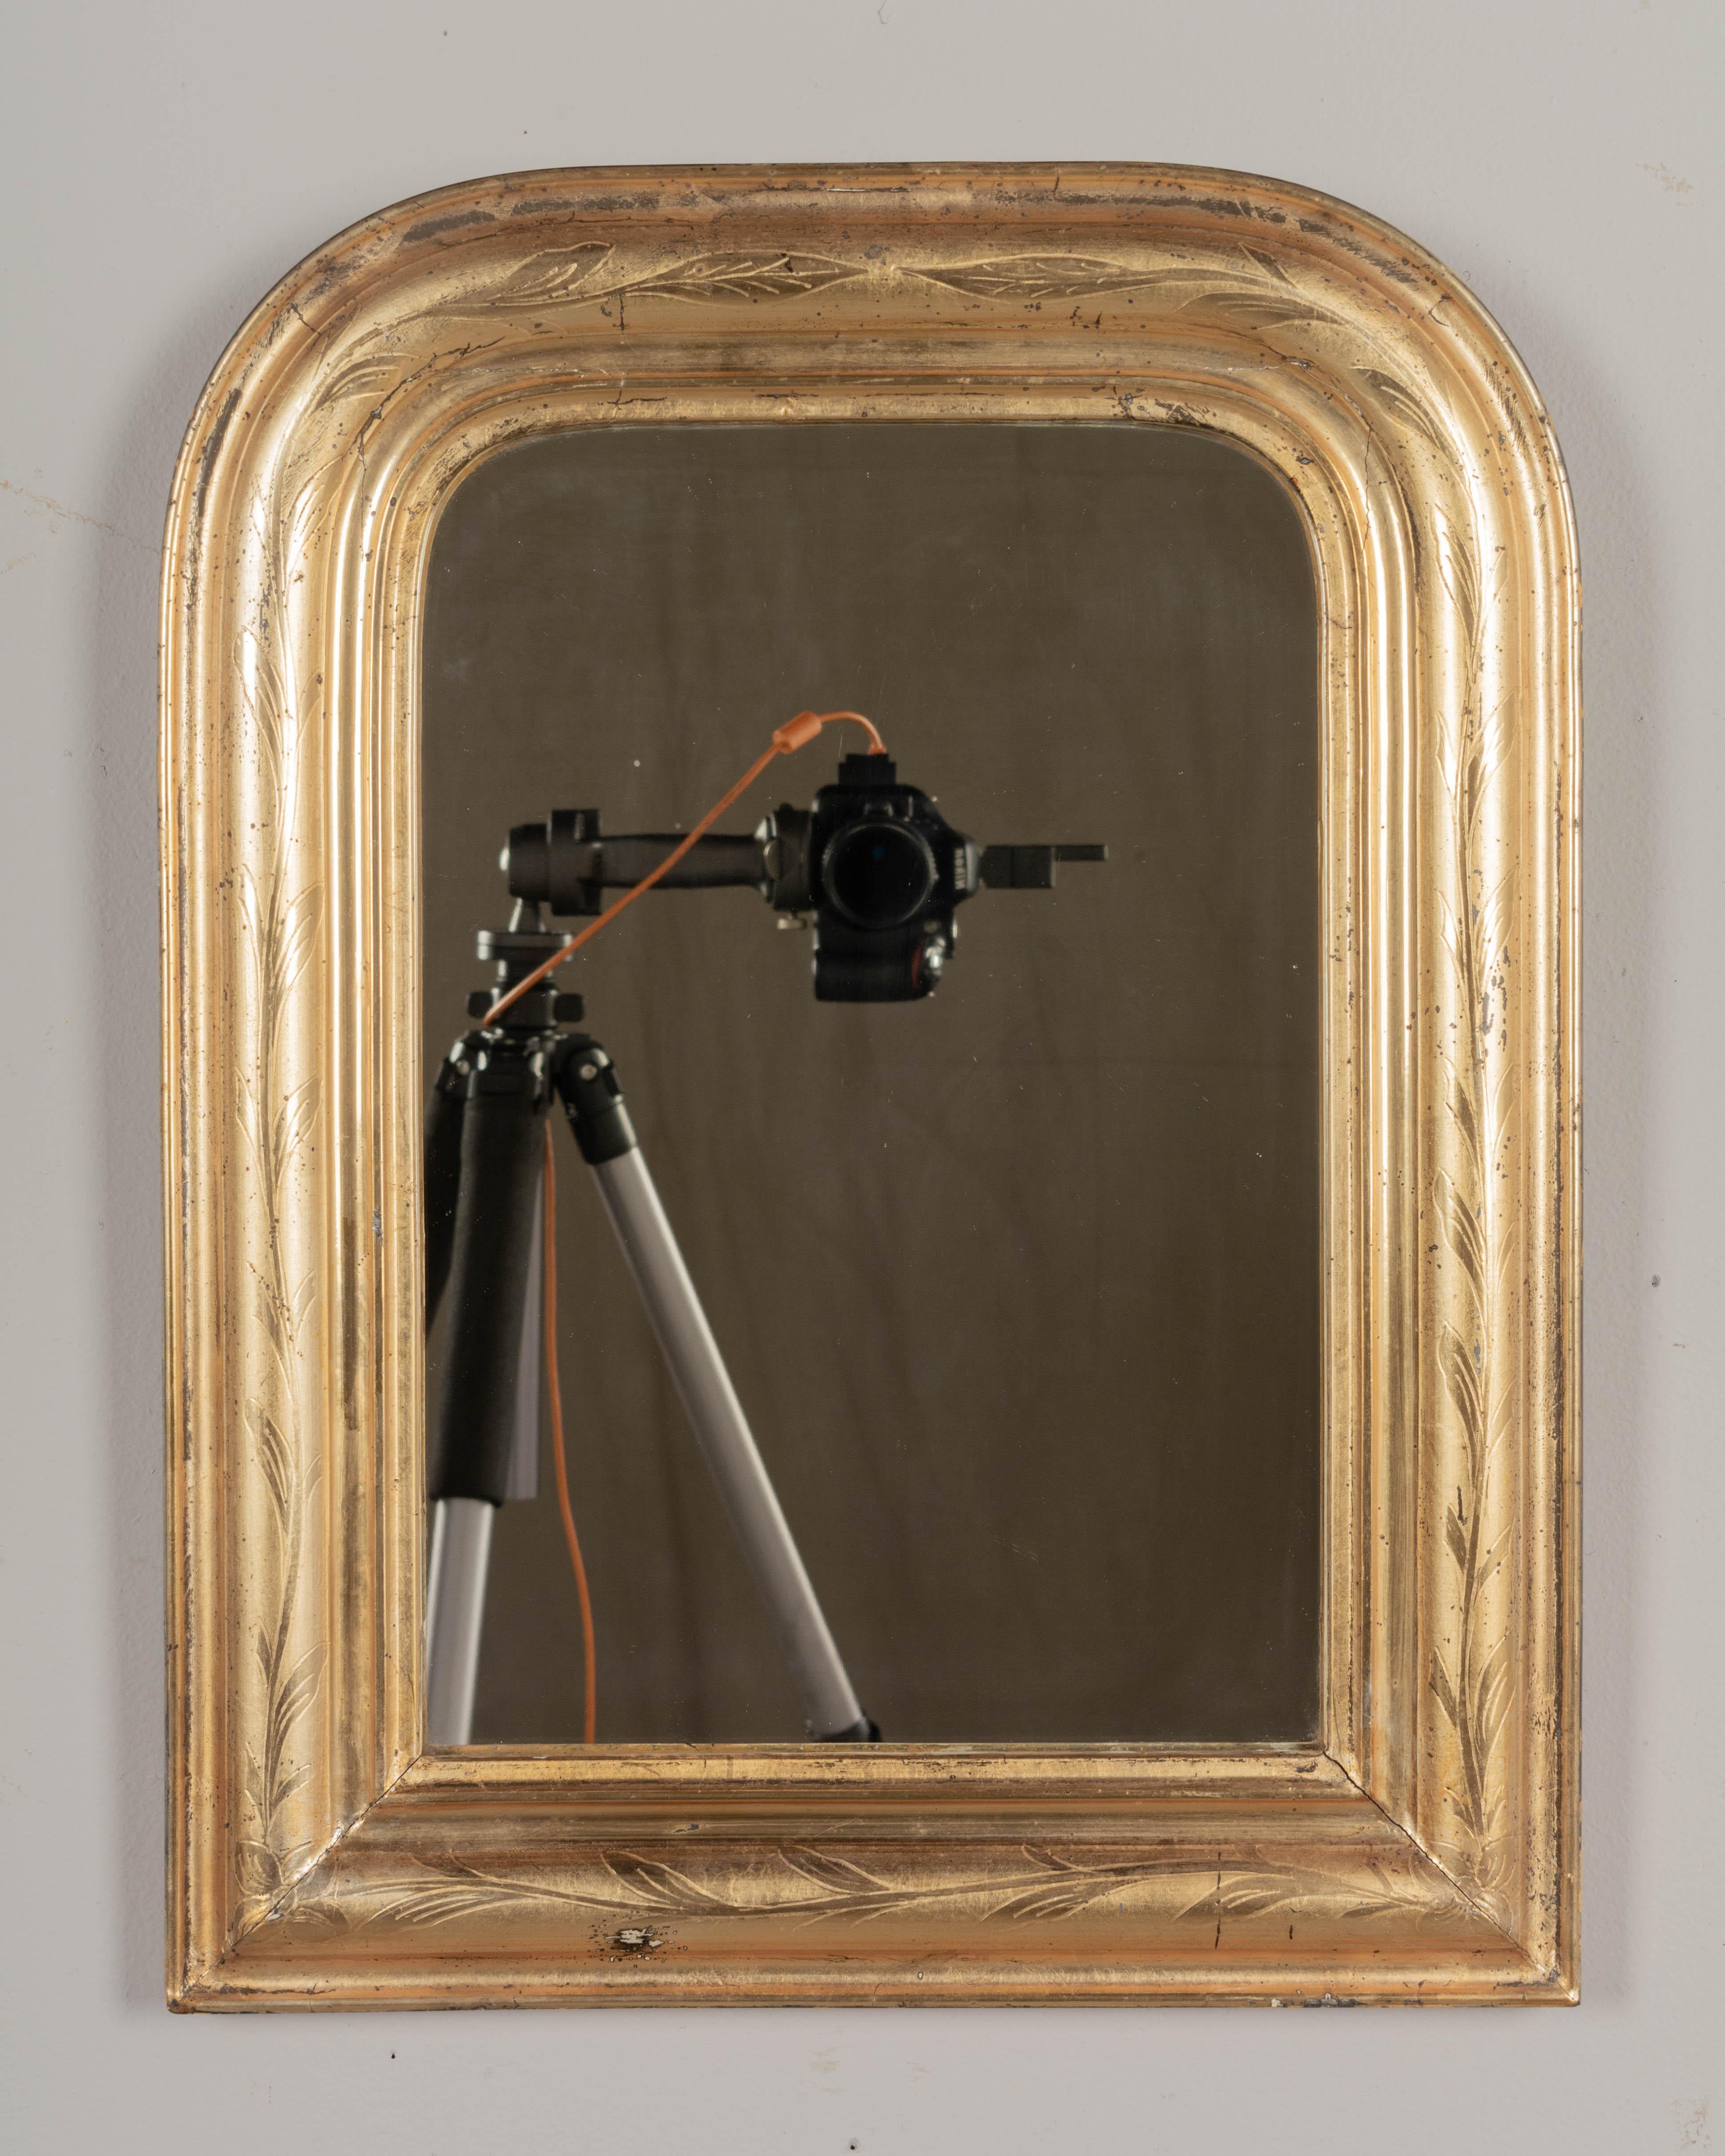 A small French Louis Philippe style giltwood mirror with curved top corners and incised leaf decoration. Original mirror. Bright gilt finish with minor losses. Please refer to photos for more details.
Overall dimensions: 15.75